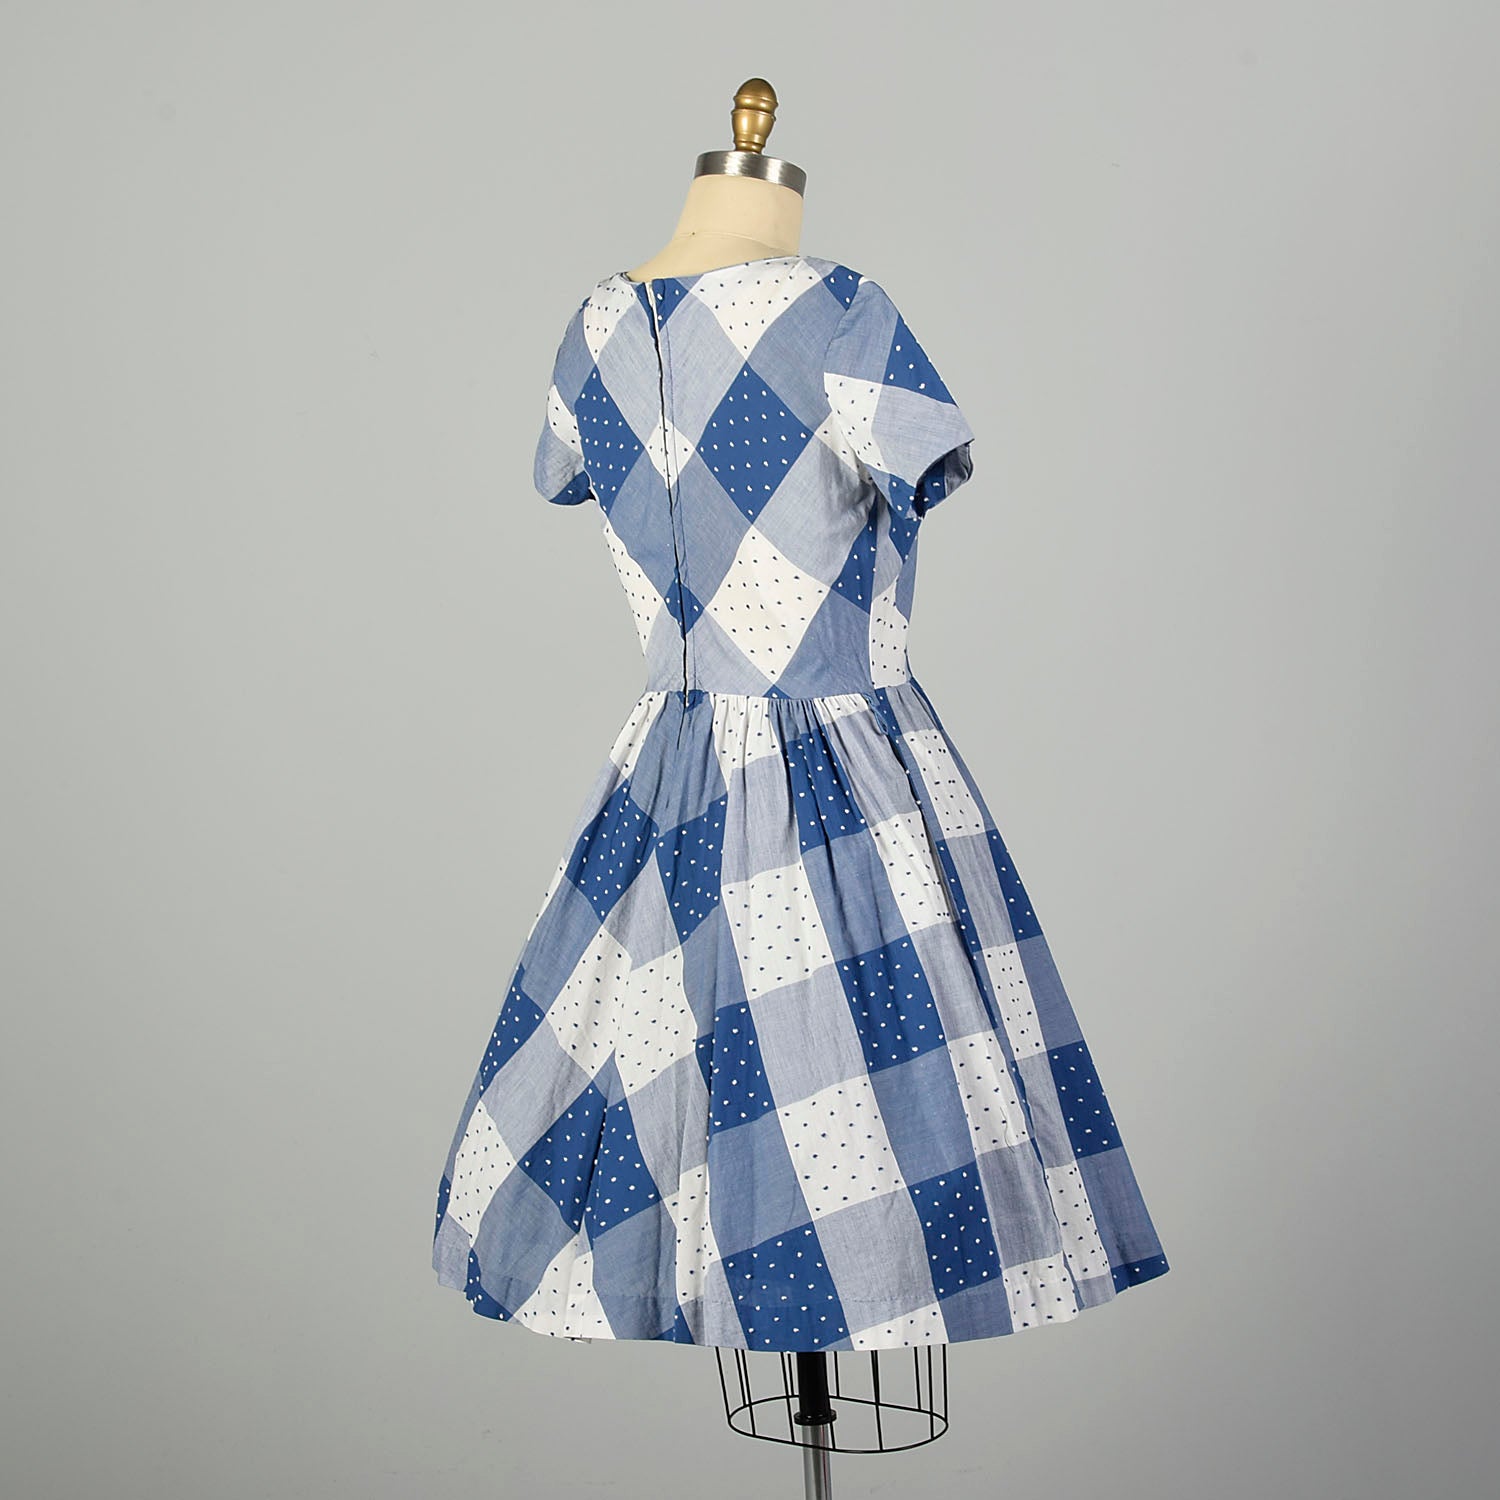 Medium 1950s Day Dress Blue Plaid Cotton Short Sleeve Fit and Flare Summer